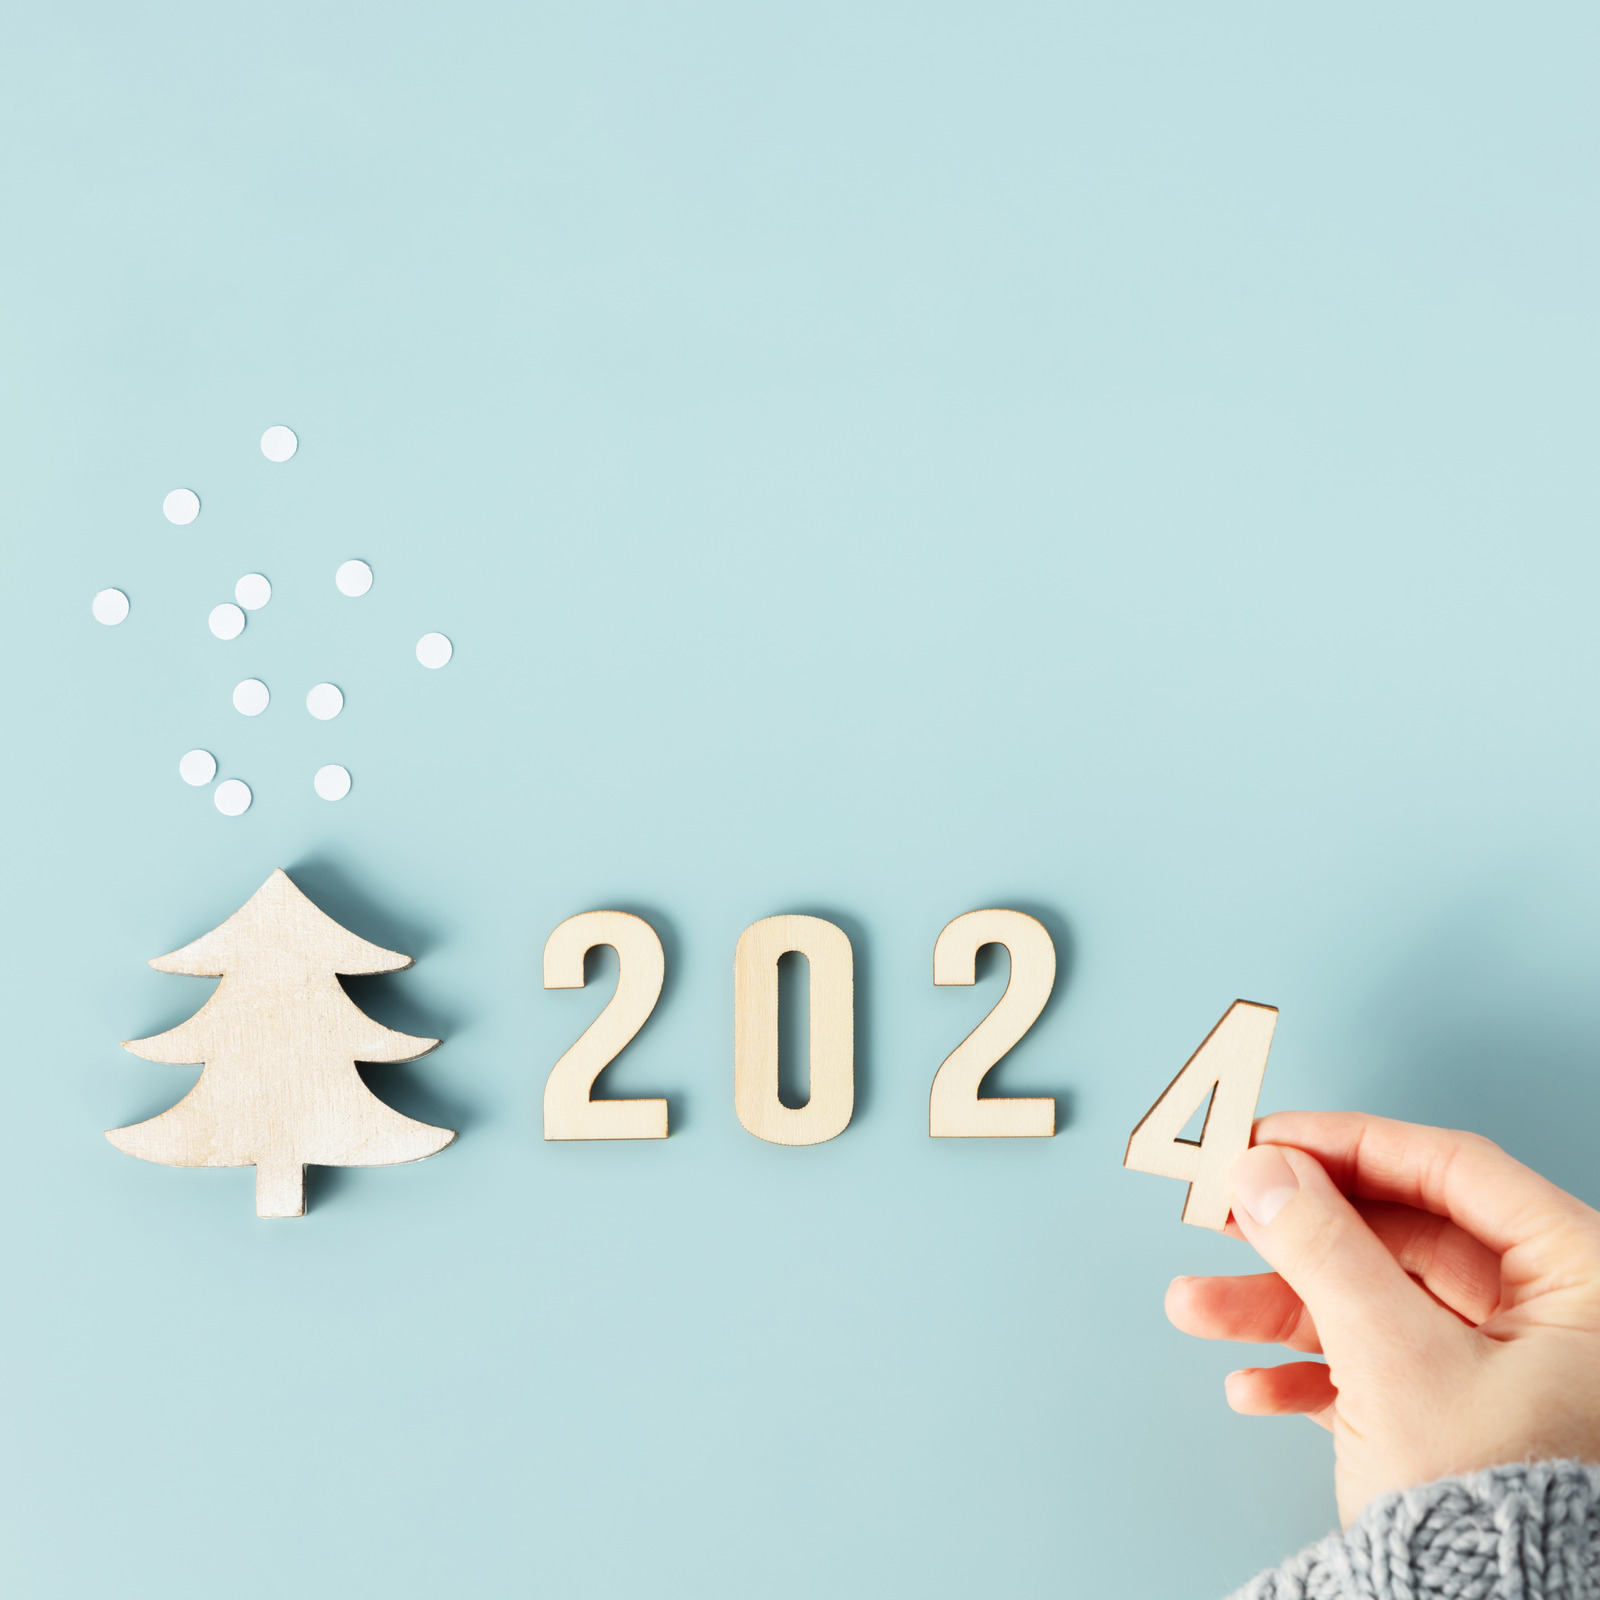 Close Up Image Of Hand Folds Wooden Numbers Into The Number Of The New Year 2024